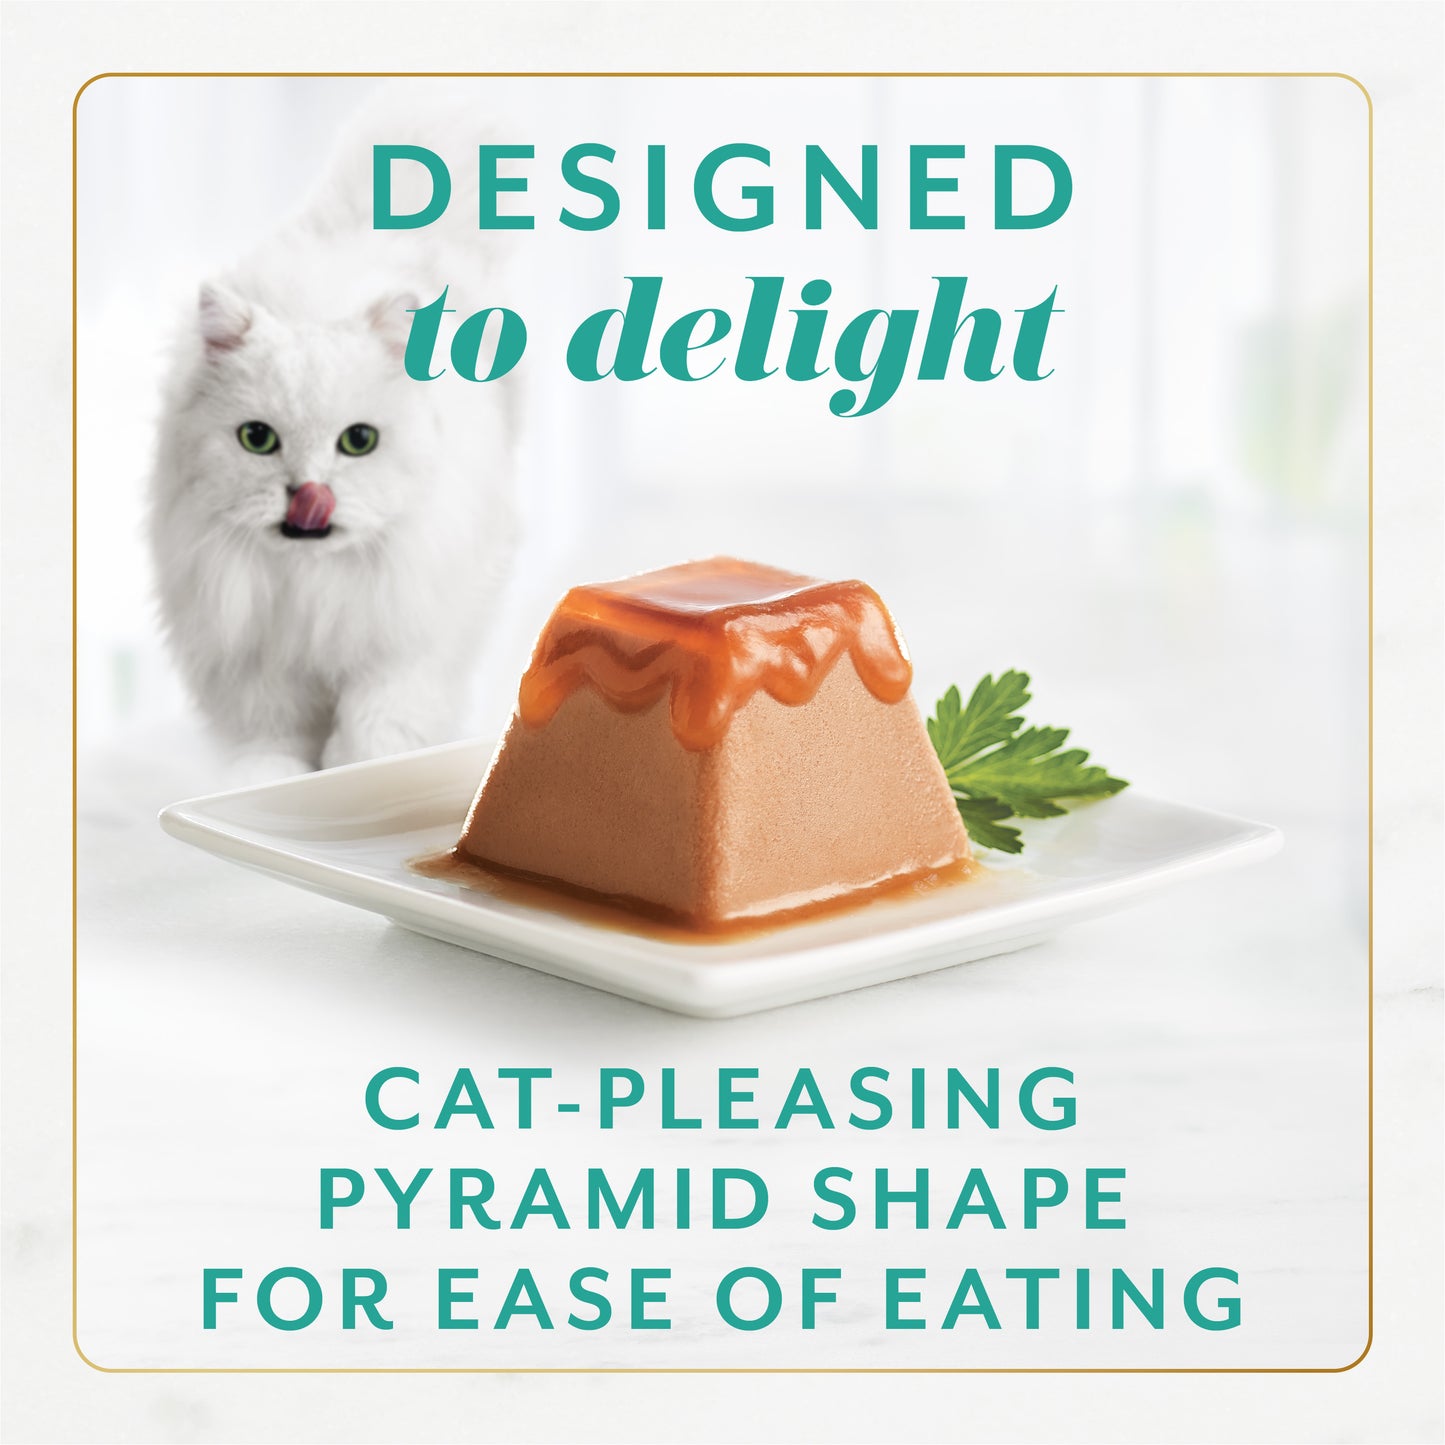 Designed to delight. Cat-pleasing pyramid shape for ease of eating